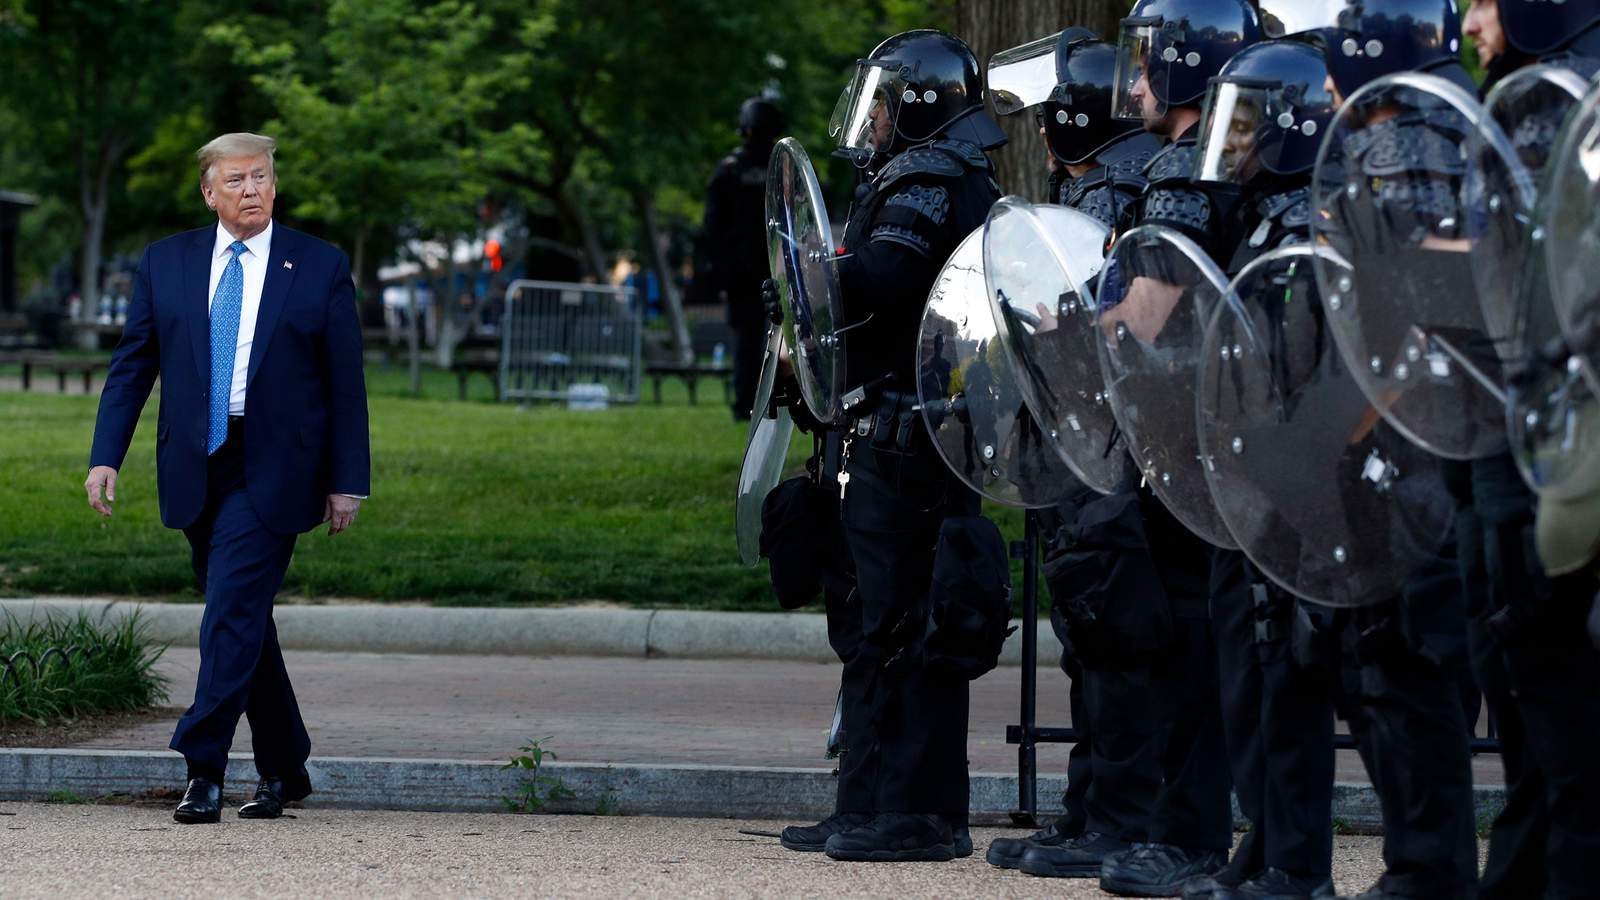 White House wanted 10k active duty troops to quell protesters